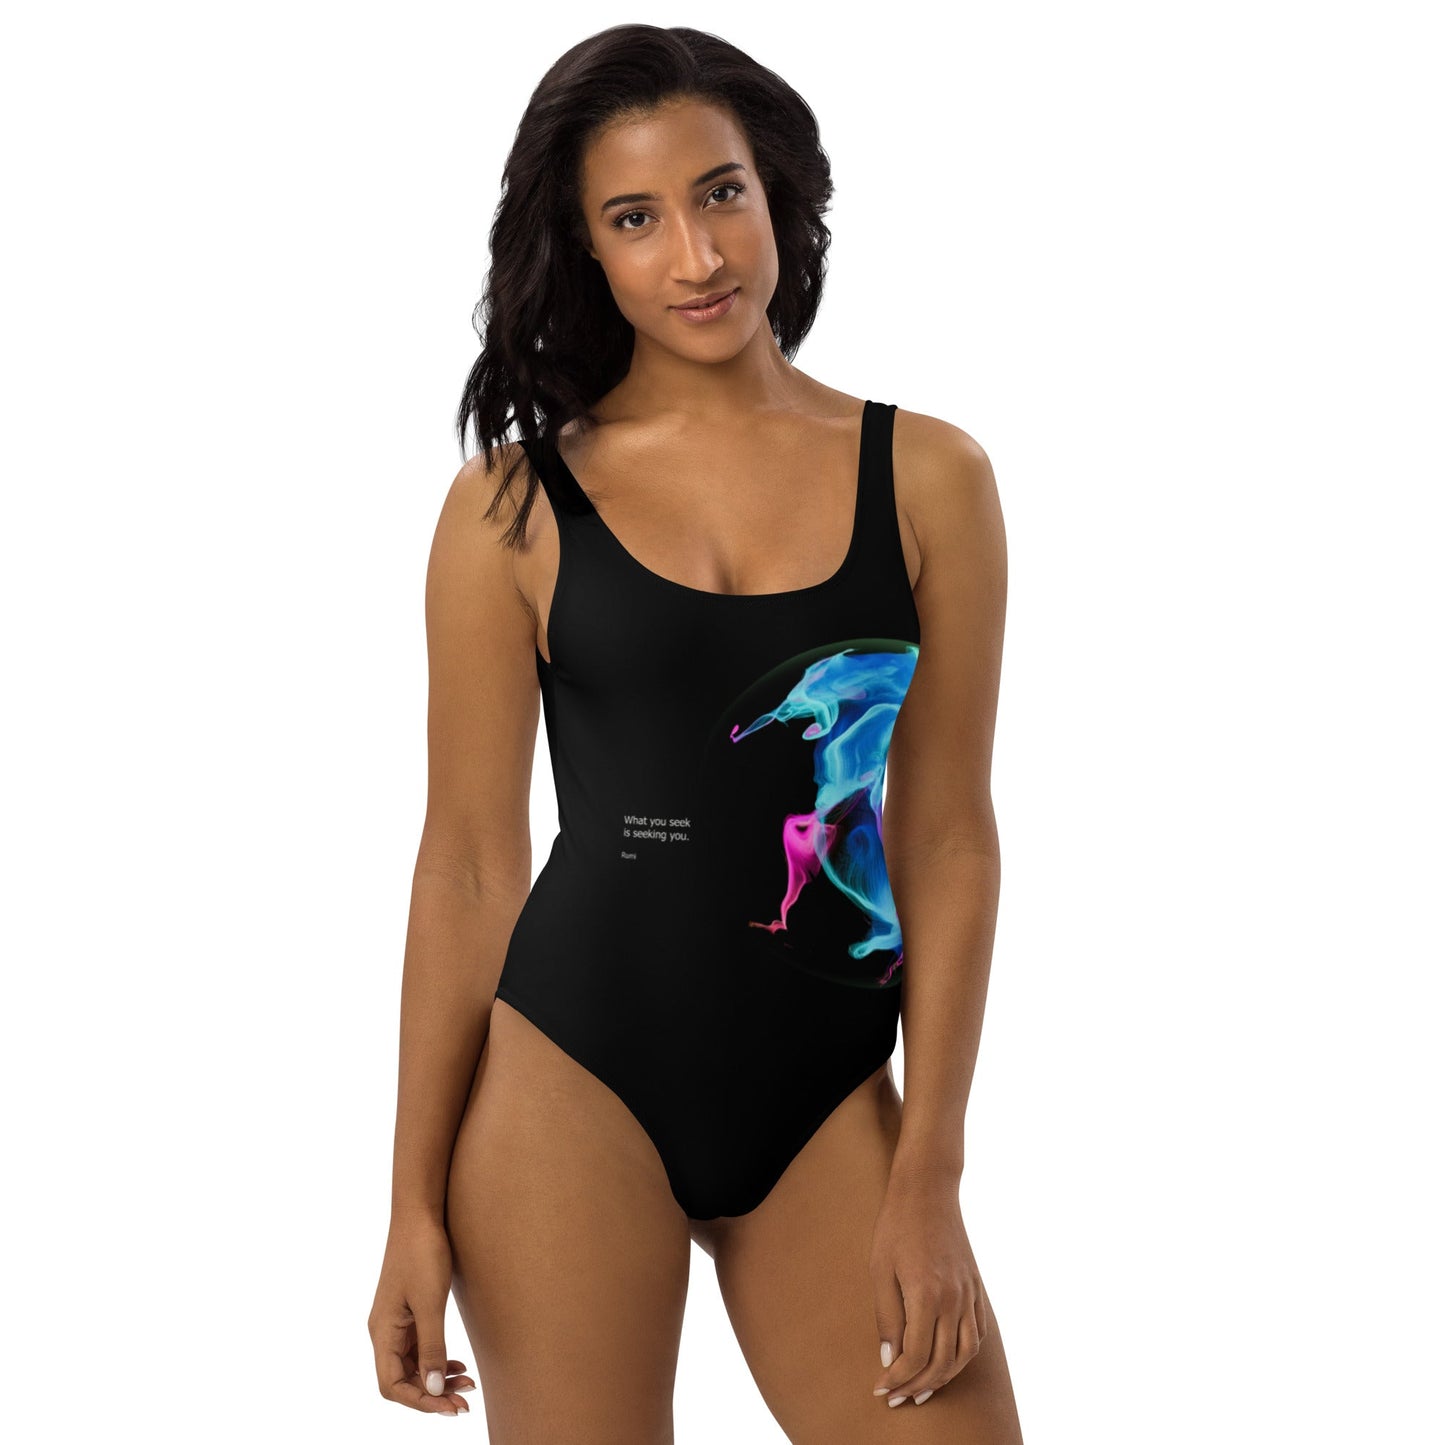 What You Seek One Piece Swimsuit - Bonotee